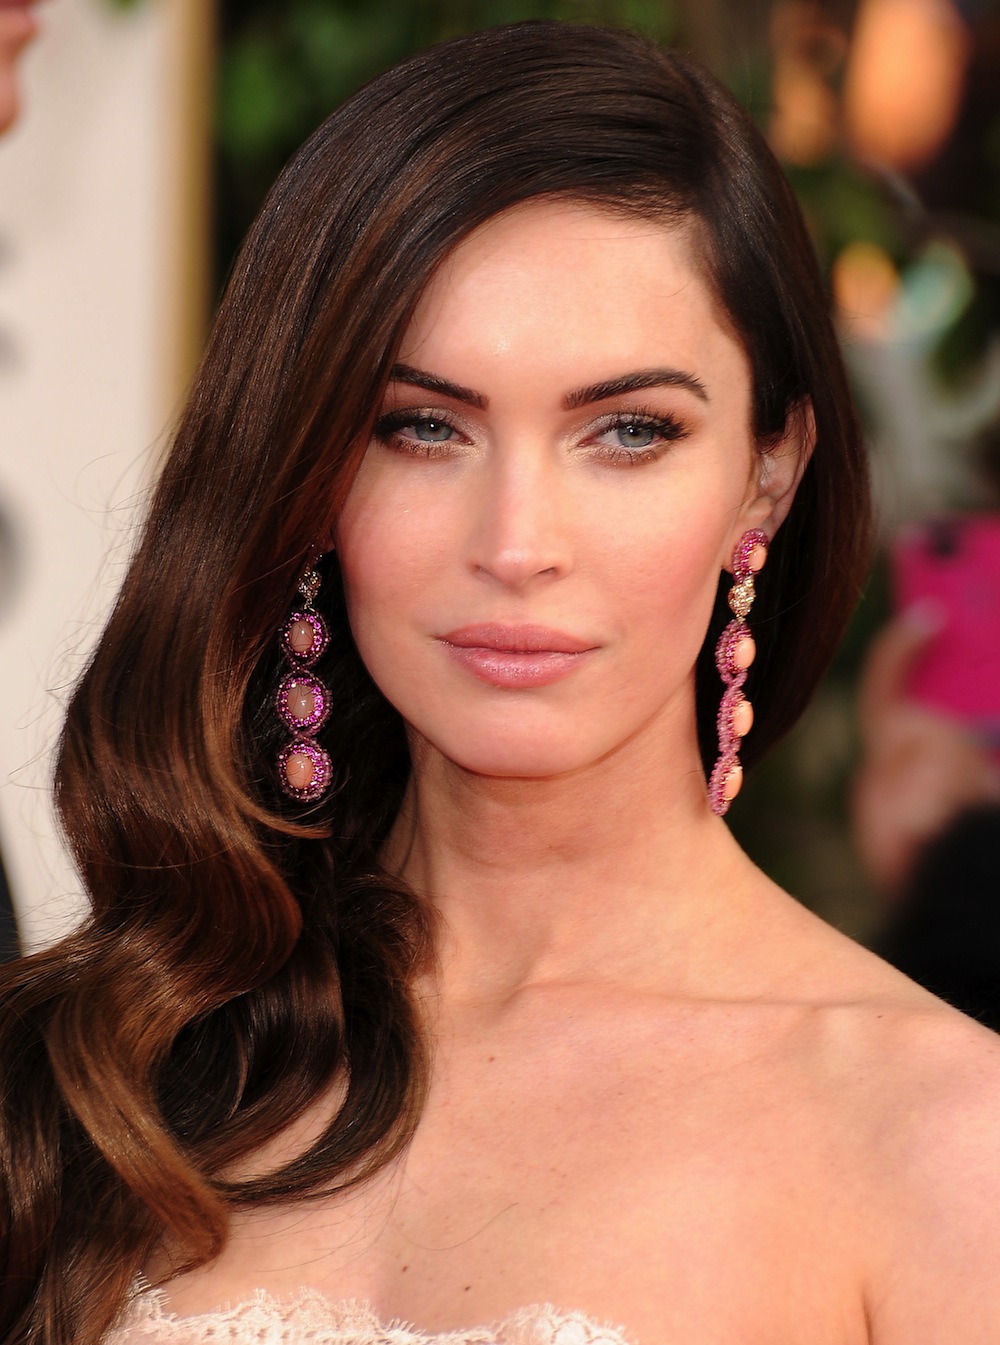 Megan Fox Looks Nearly Unrecognizable In Curly Blonde Wig